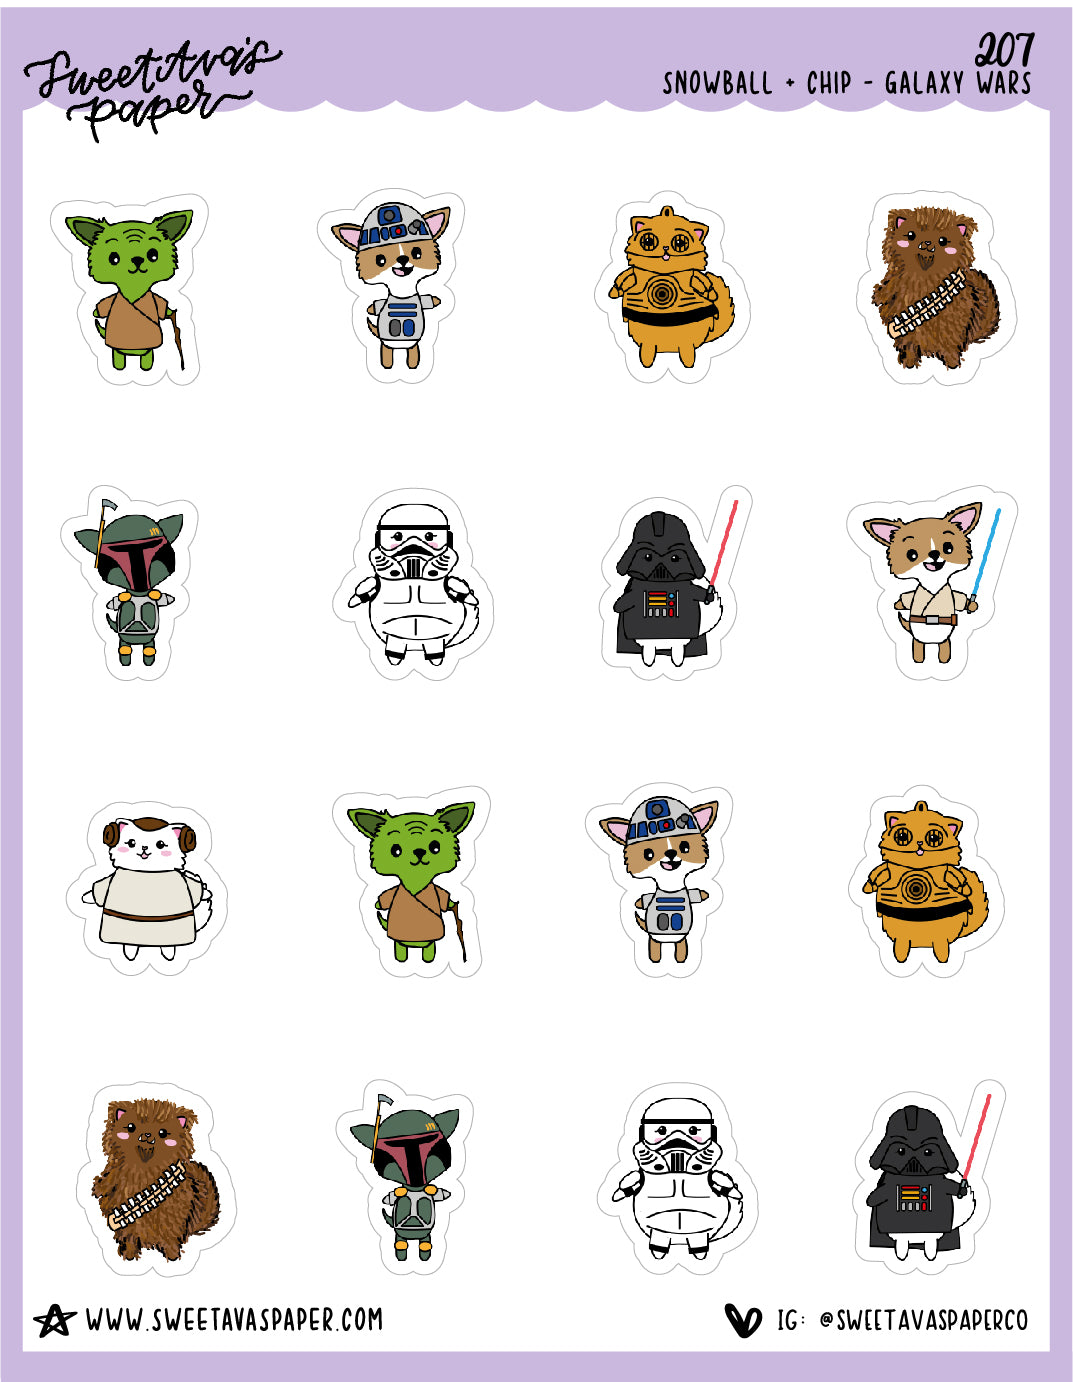 Pew Pew Wars Stickers - Snowball The Cat - [207]